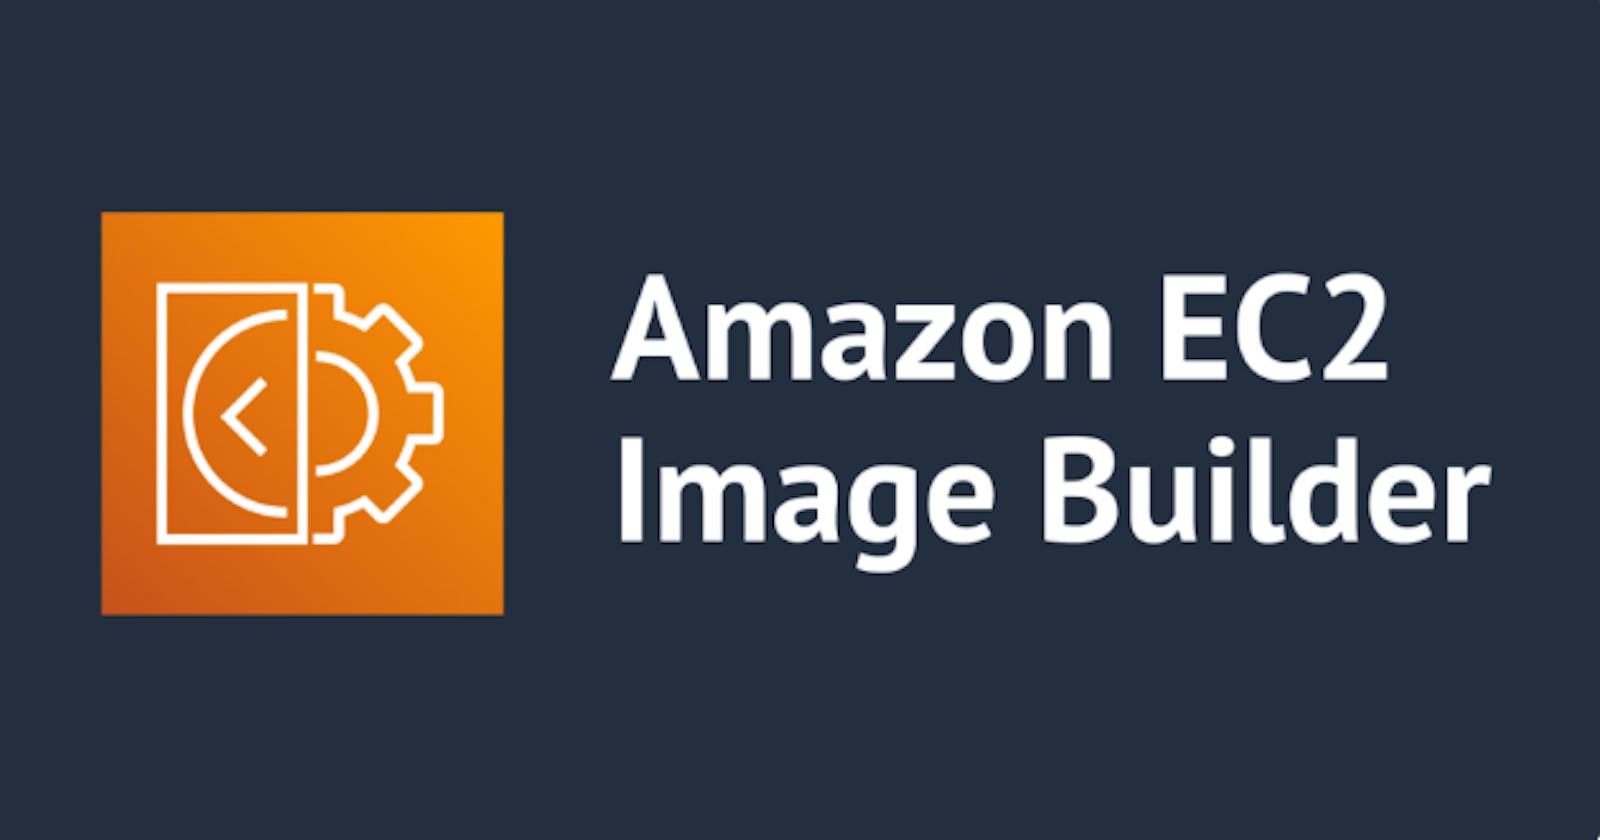 AWS EC2 Image Builder Unveiled: A Comprehensive and Implementation Guide